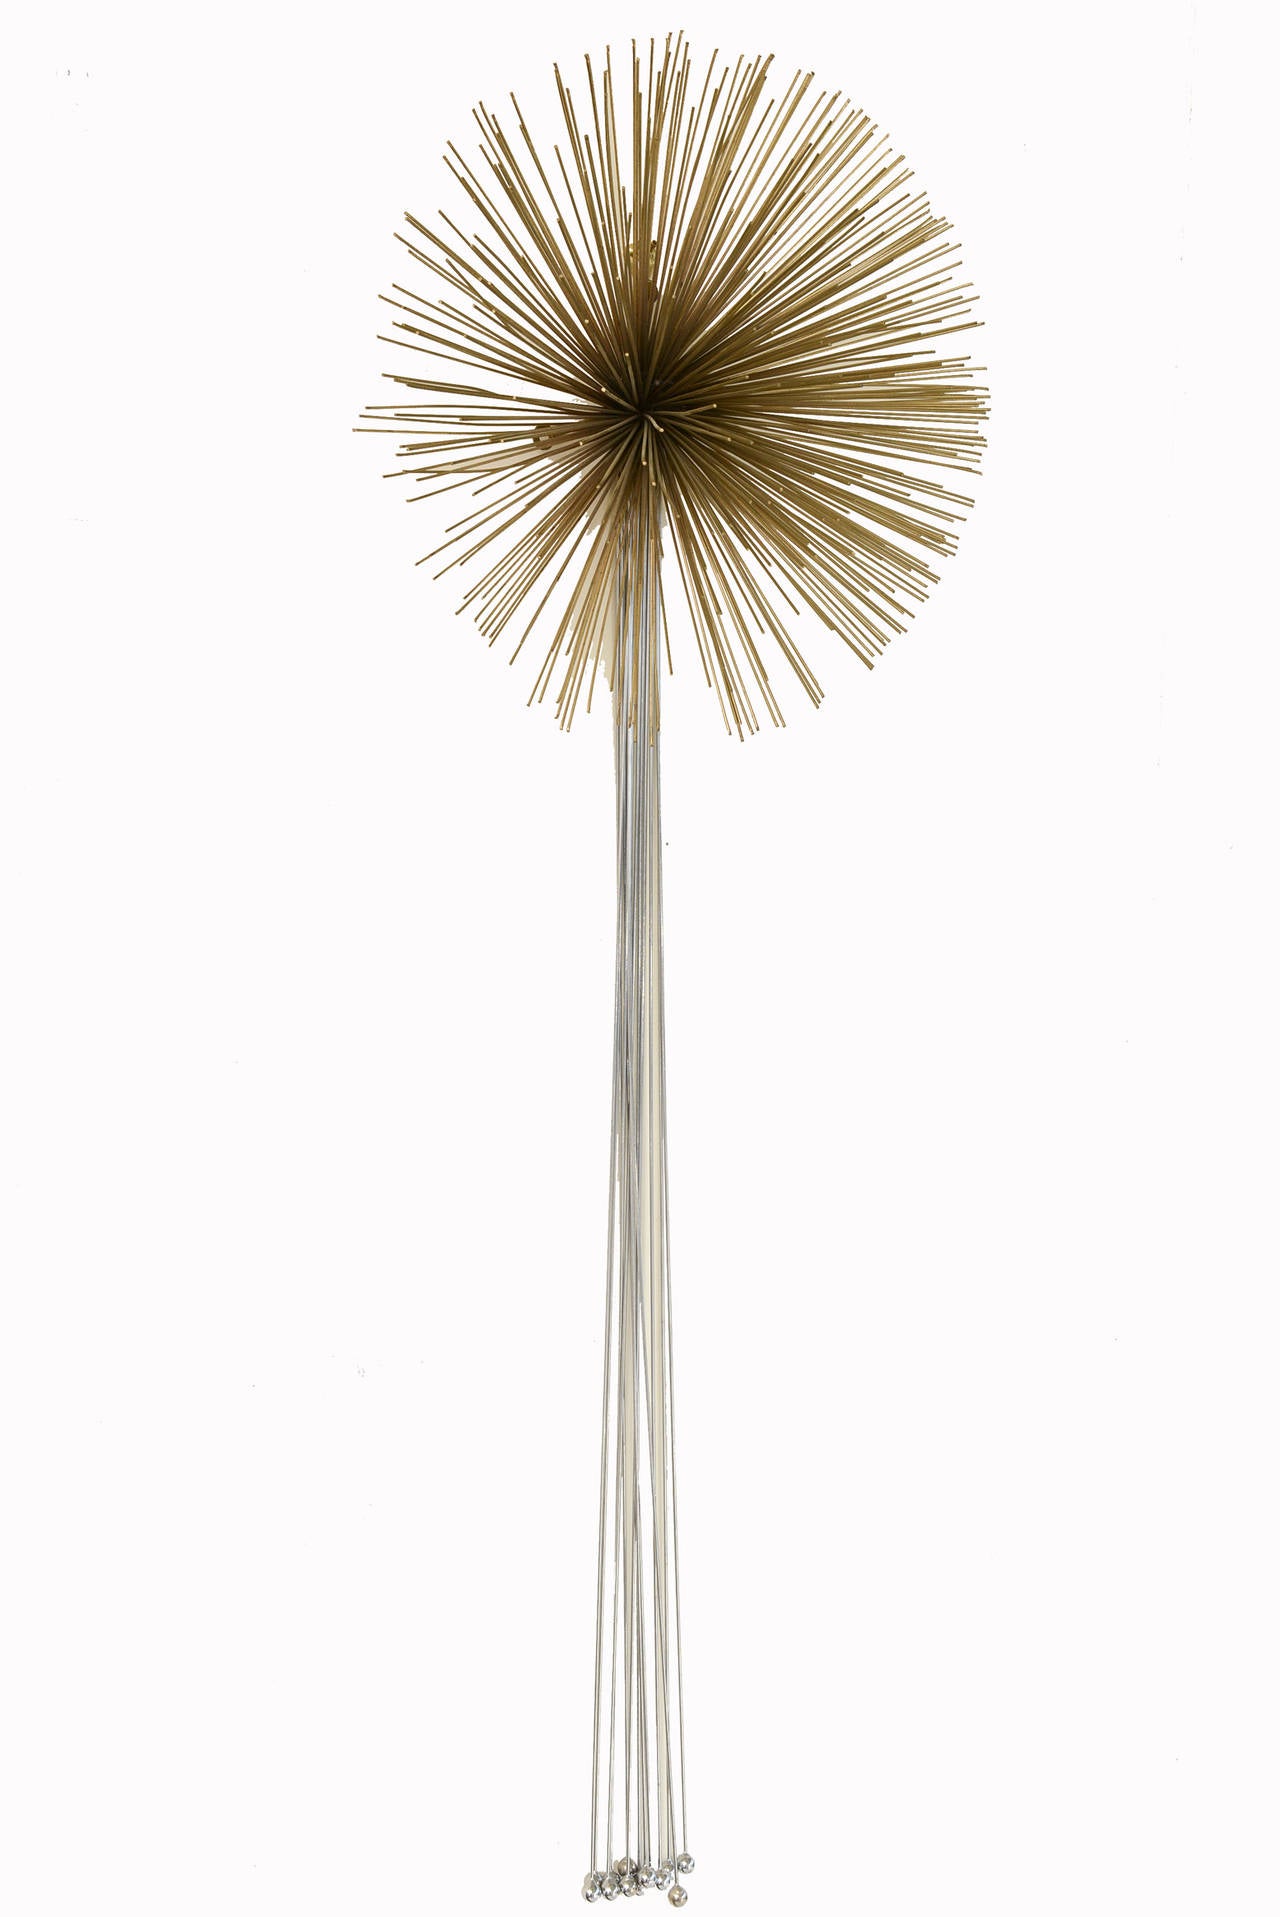 This Curtis Jere wall sculpture has dangling rods ending with balls as the tips meet a starburst of brass as the pom pom. It is mixed metals with chrome at the bottom and brass at the top. This Curtis Jere vintage wall hanging sculpture can fit in